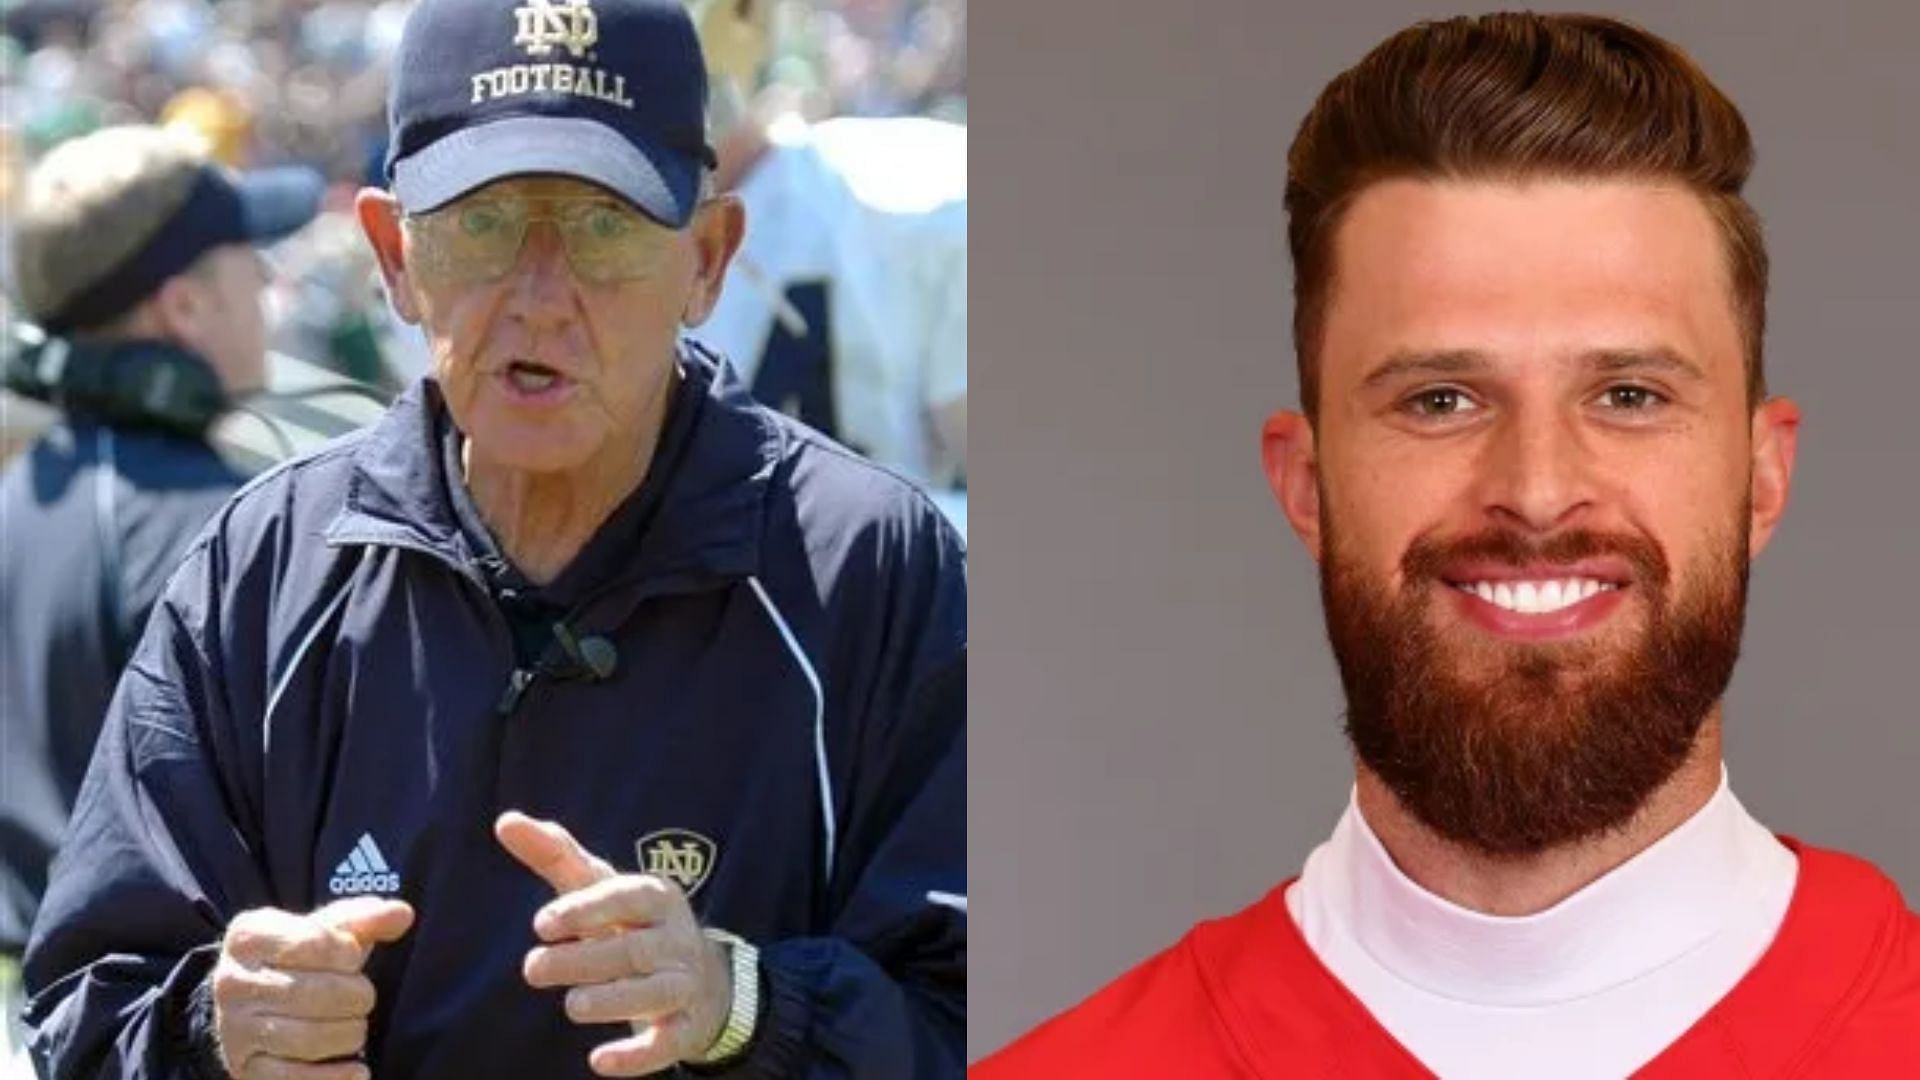 Lou Holtz has shown his support for Harrison Butker